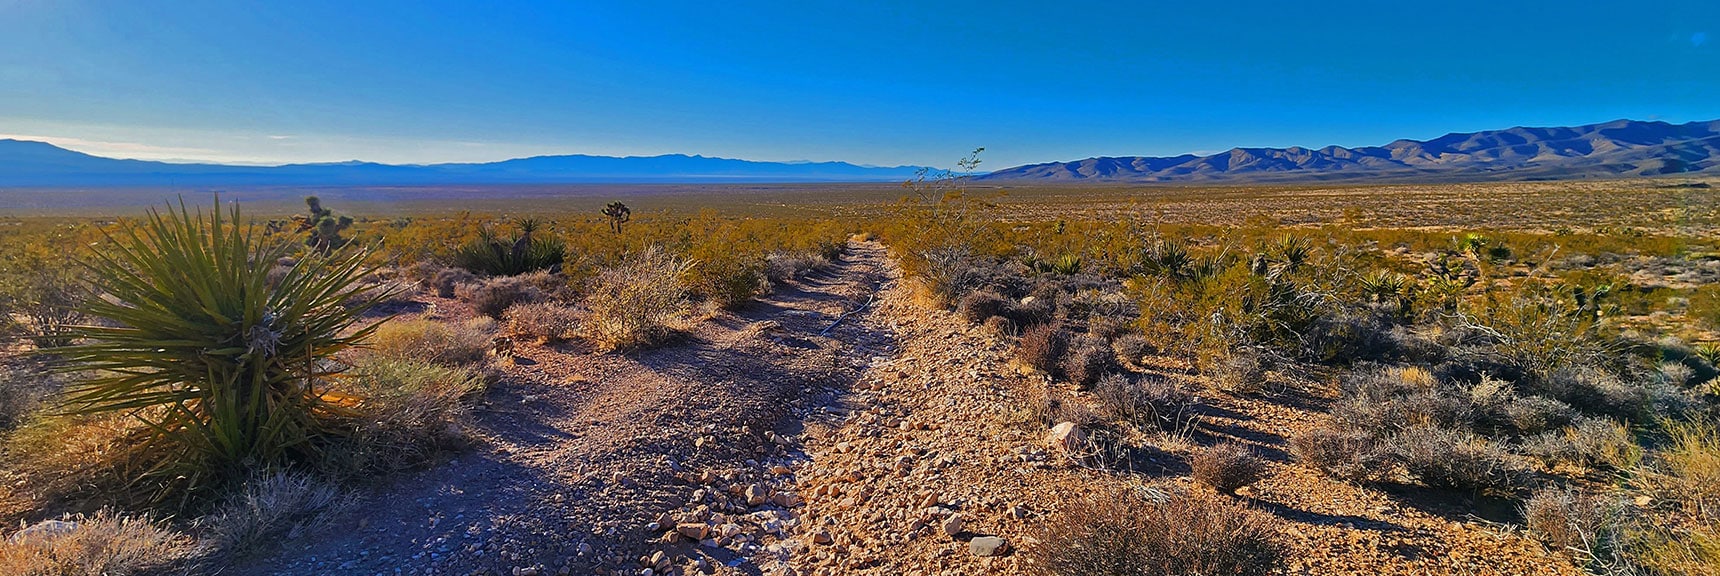 Take Road's Left Split West Away from Mule Spring Canyon | Landmark Bluff Summit | Lovell Canyon, Nevada